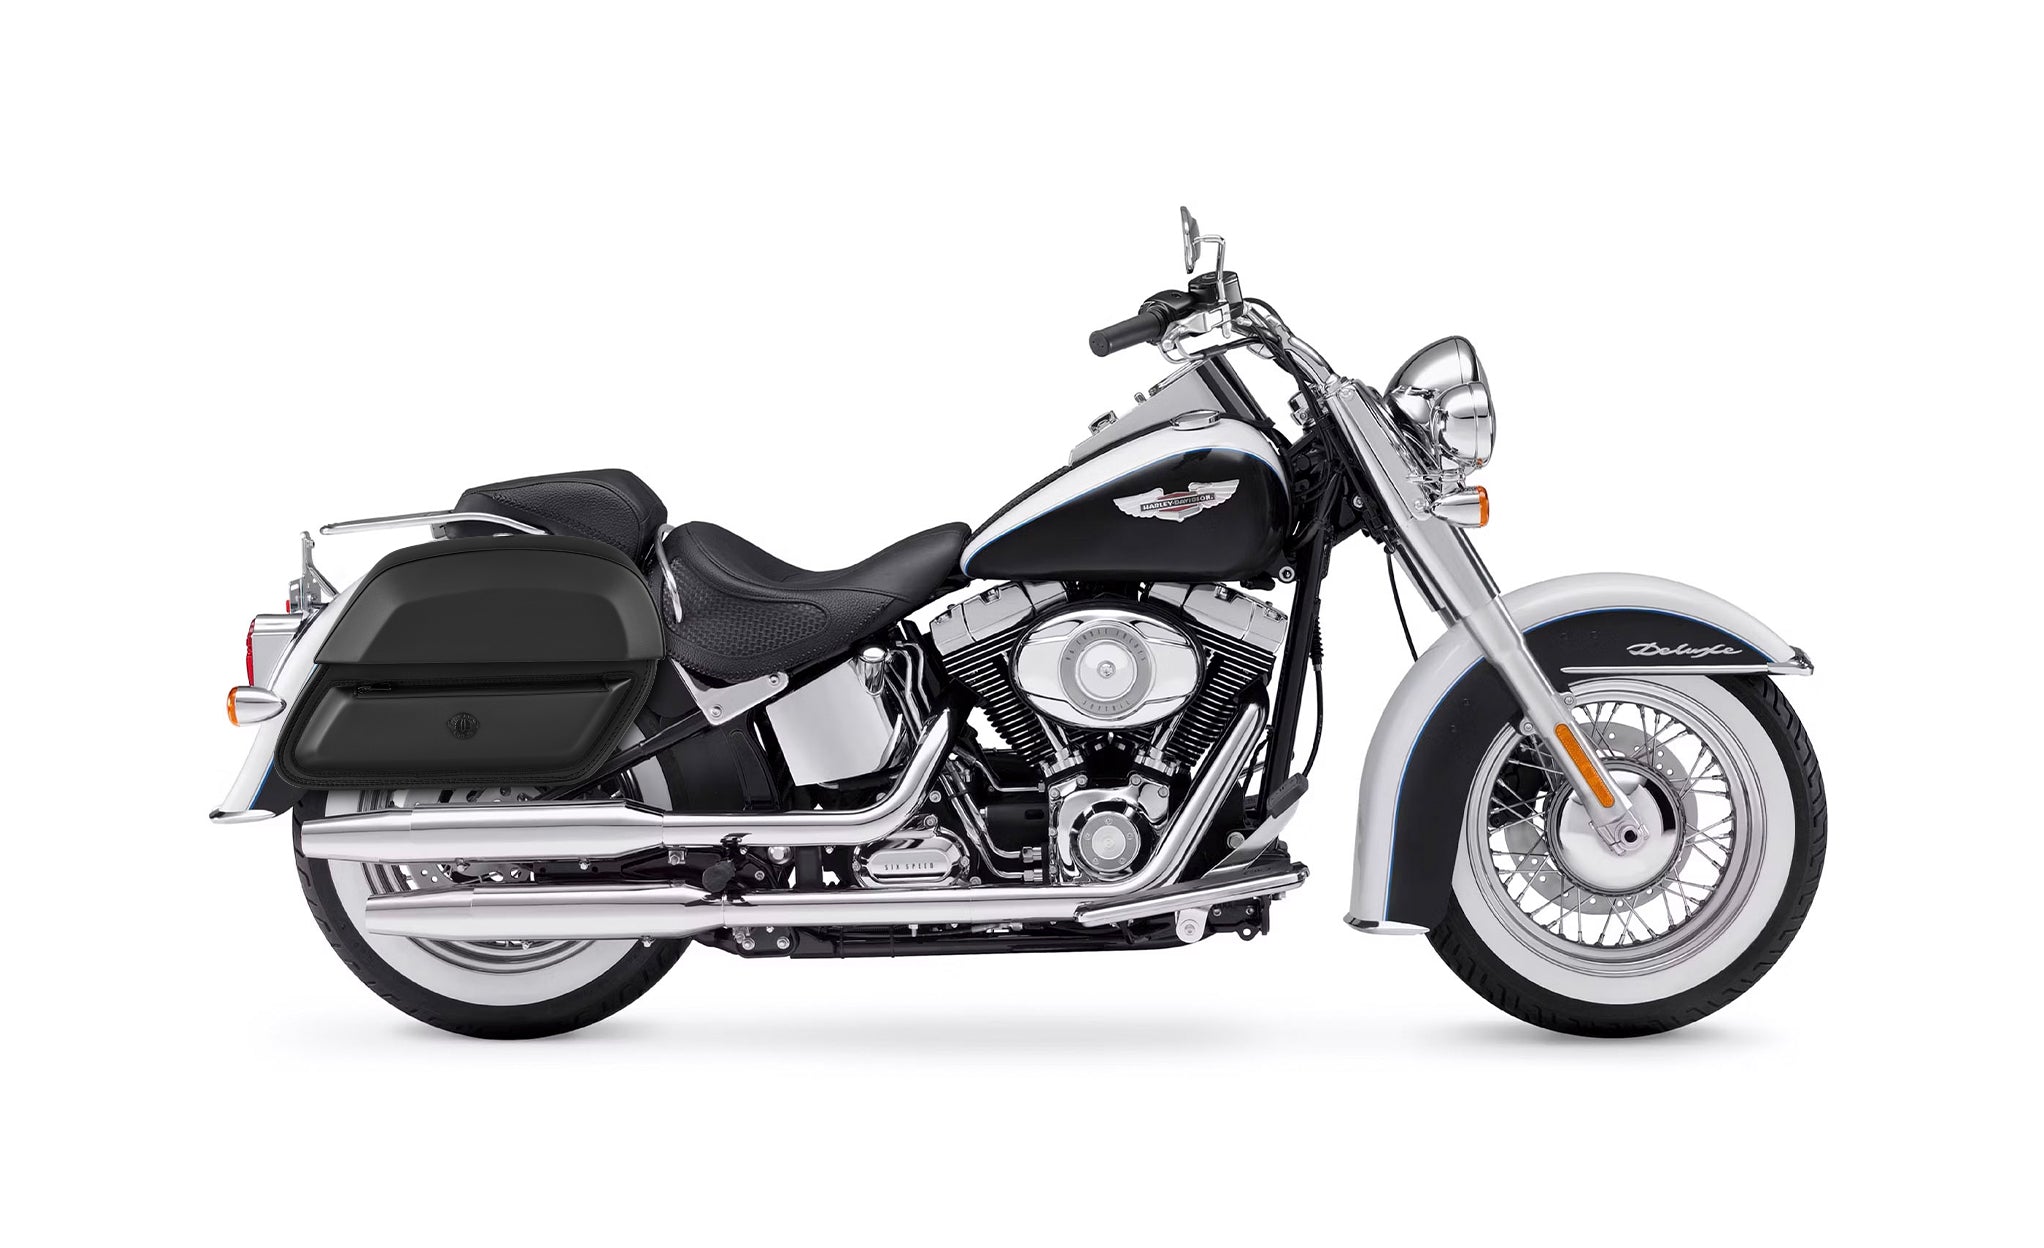 28L - Wraith Medium Leather Saddlebags for Harley Softail Deluxe FLSTN/I BAG on Bike View @expand